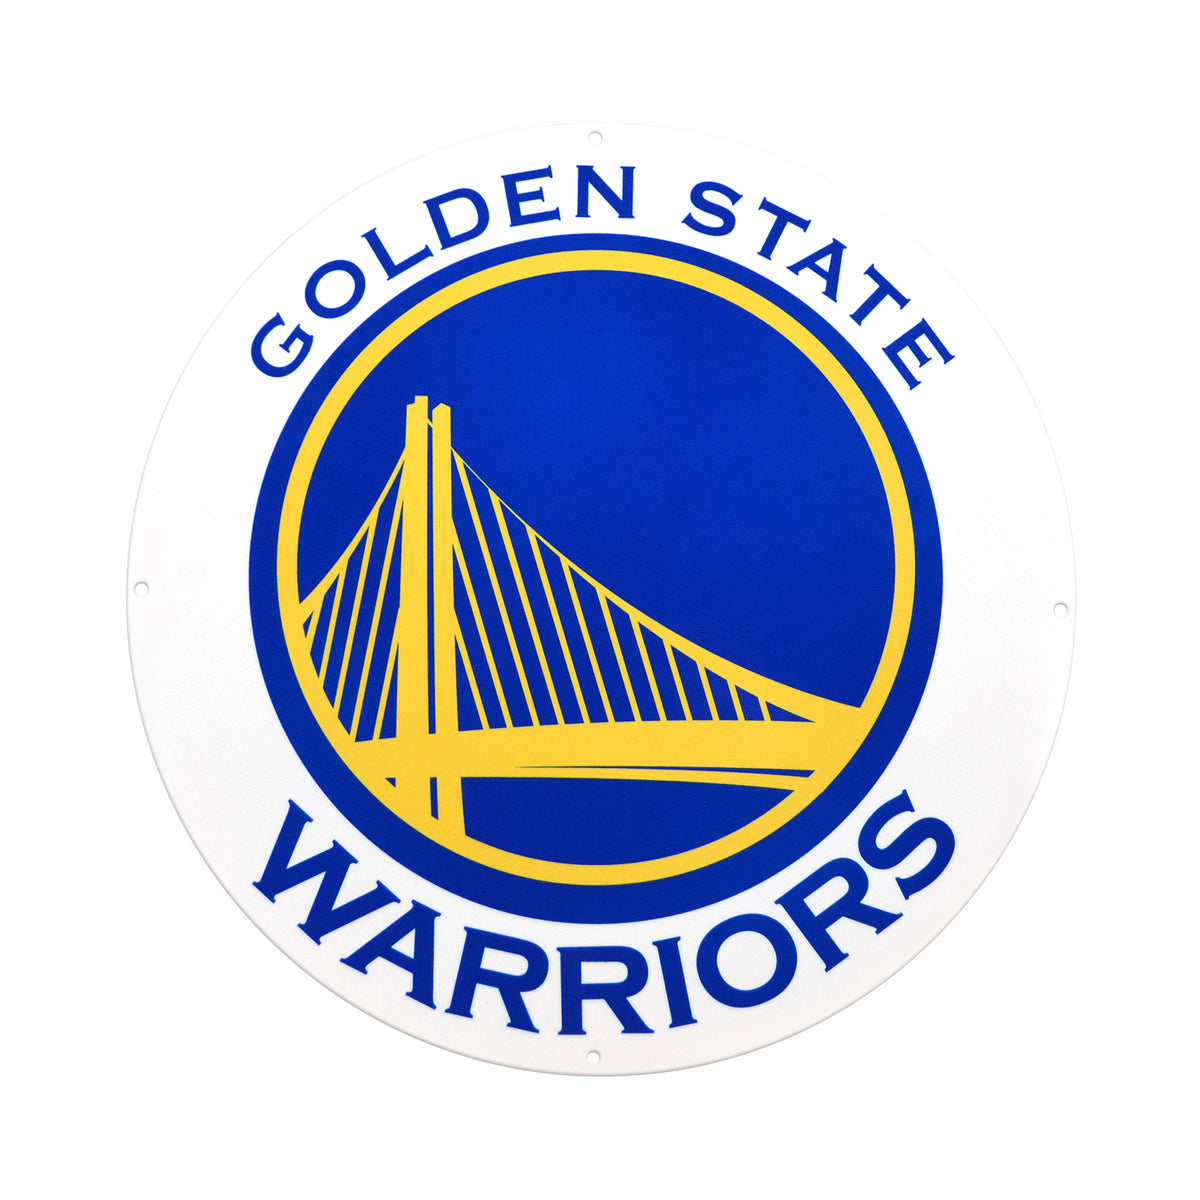 Golden State Warriors Basketball Team Retro Logo Vintage Recycled